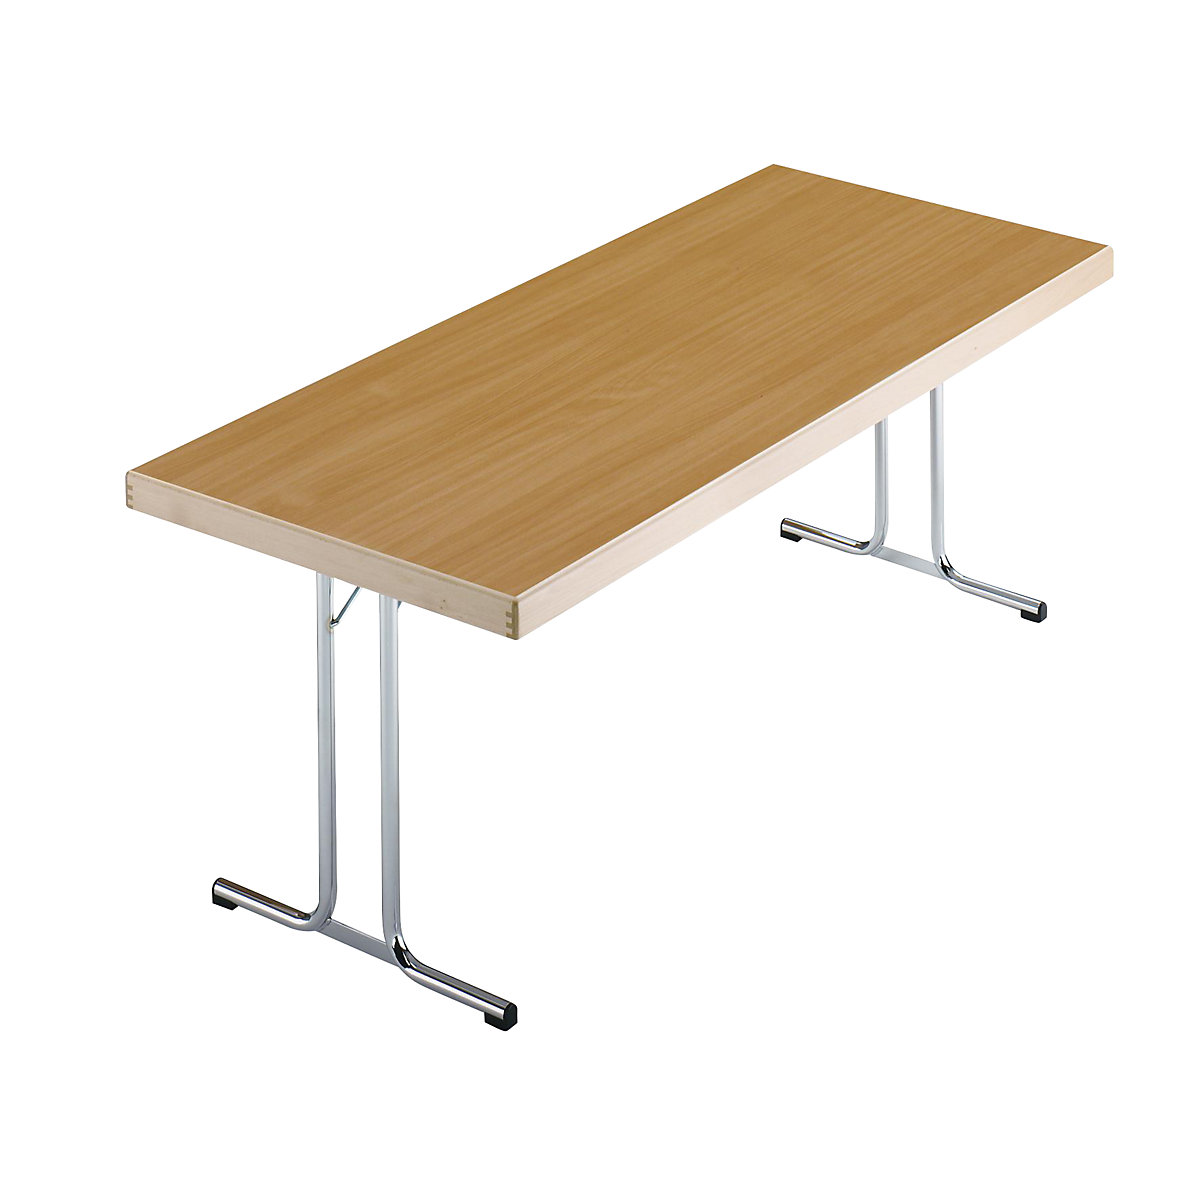 Folding table, double T-foot stand, 1500 x 800 mm, chrome plated frame, beech finish tabletop-6